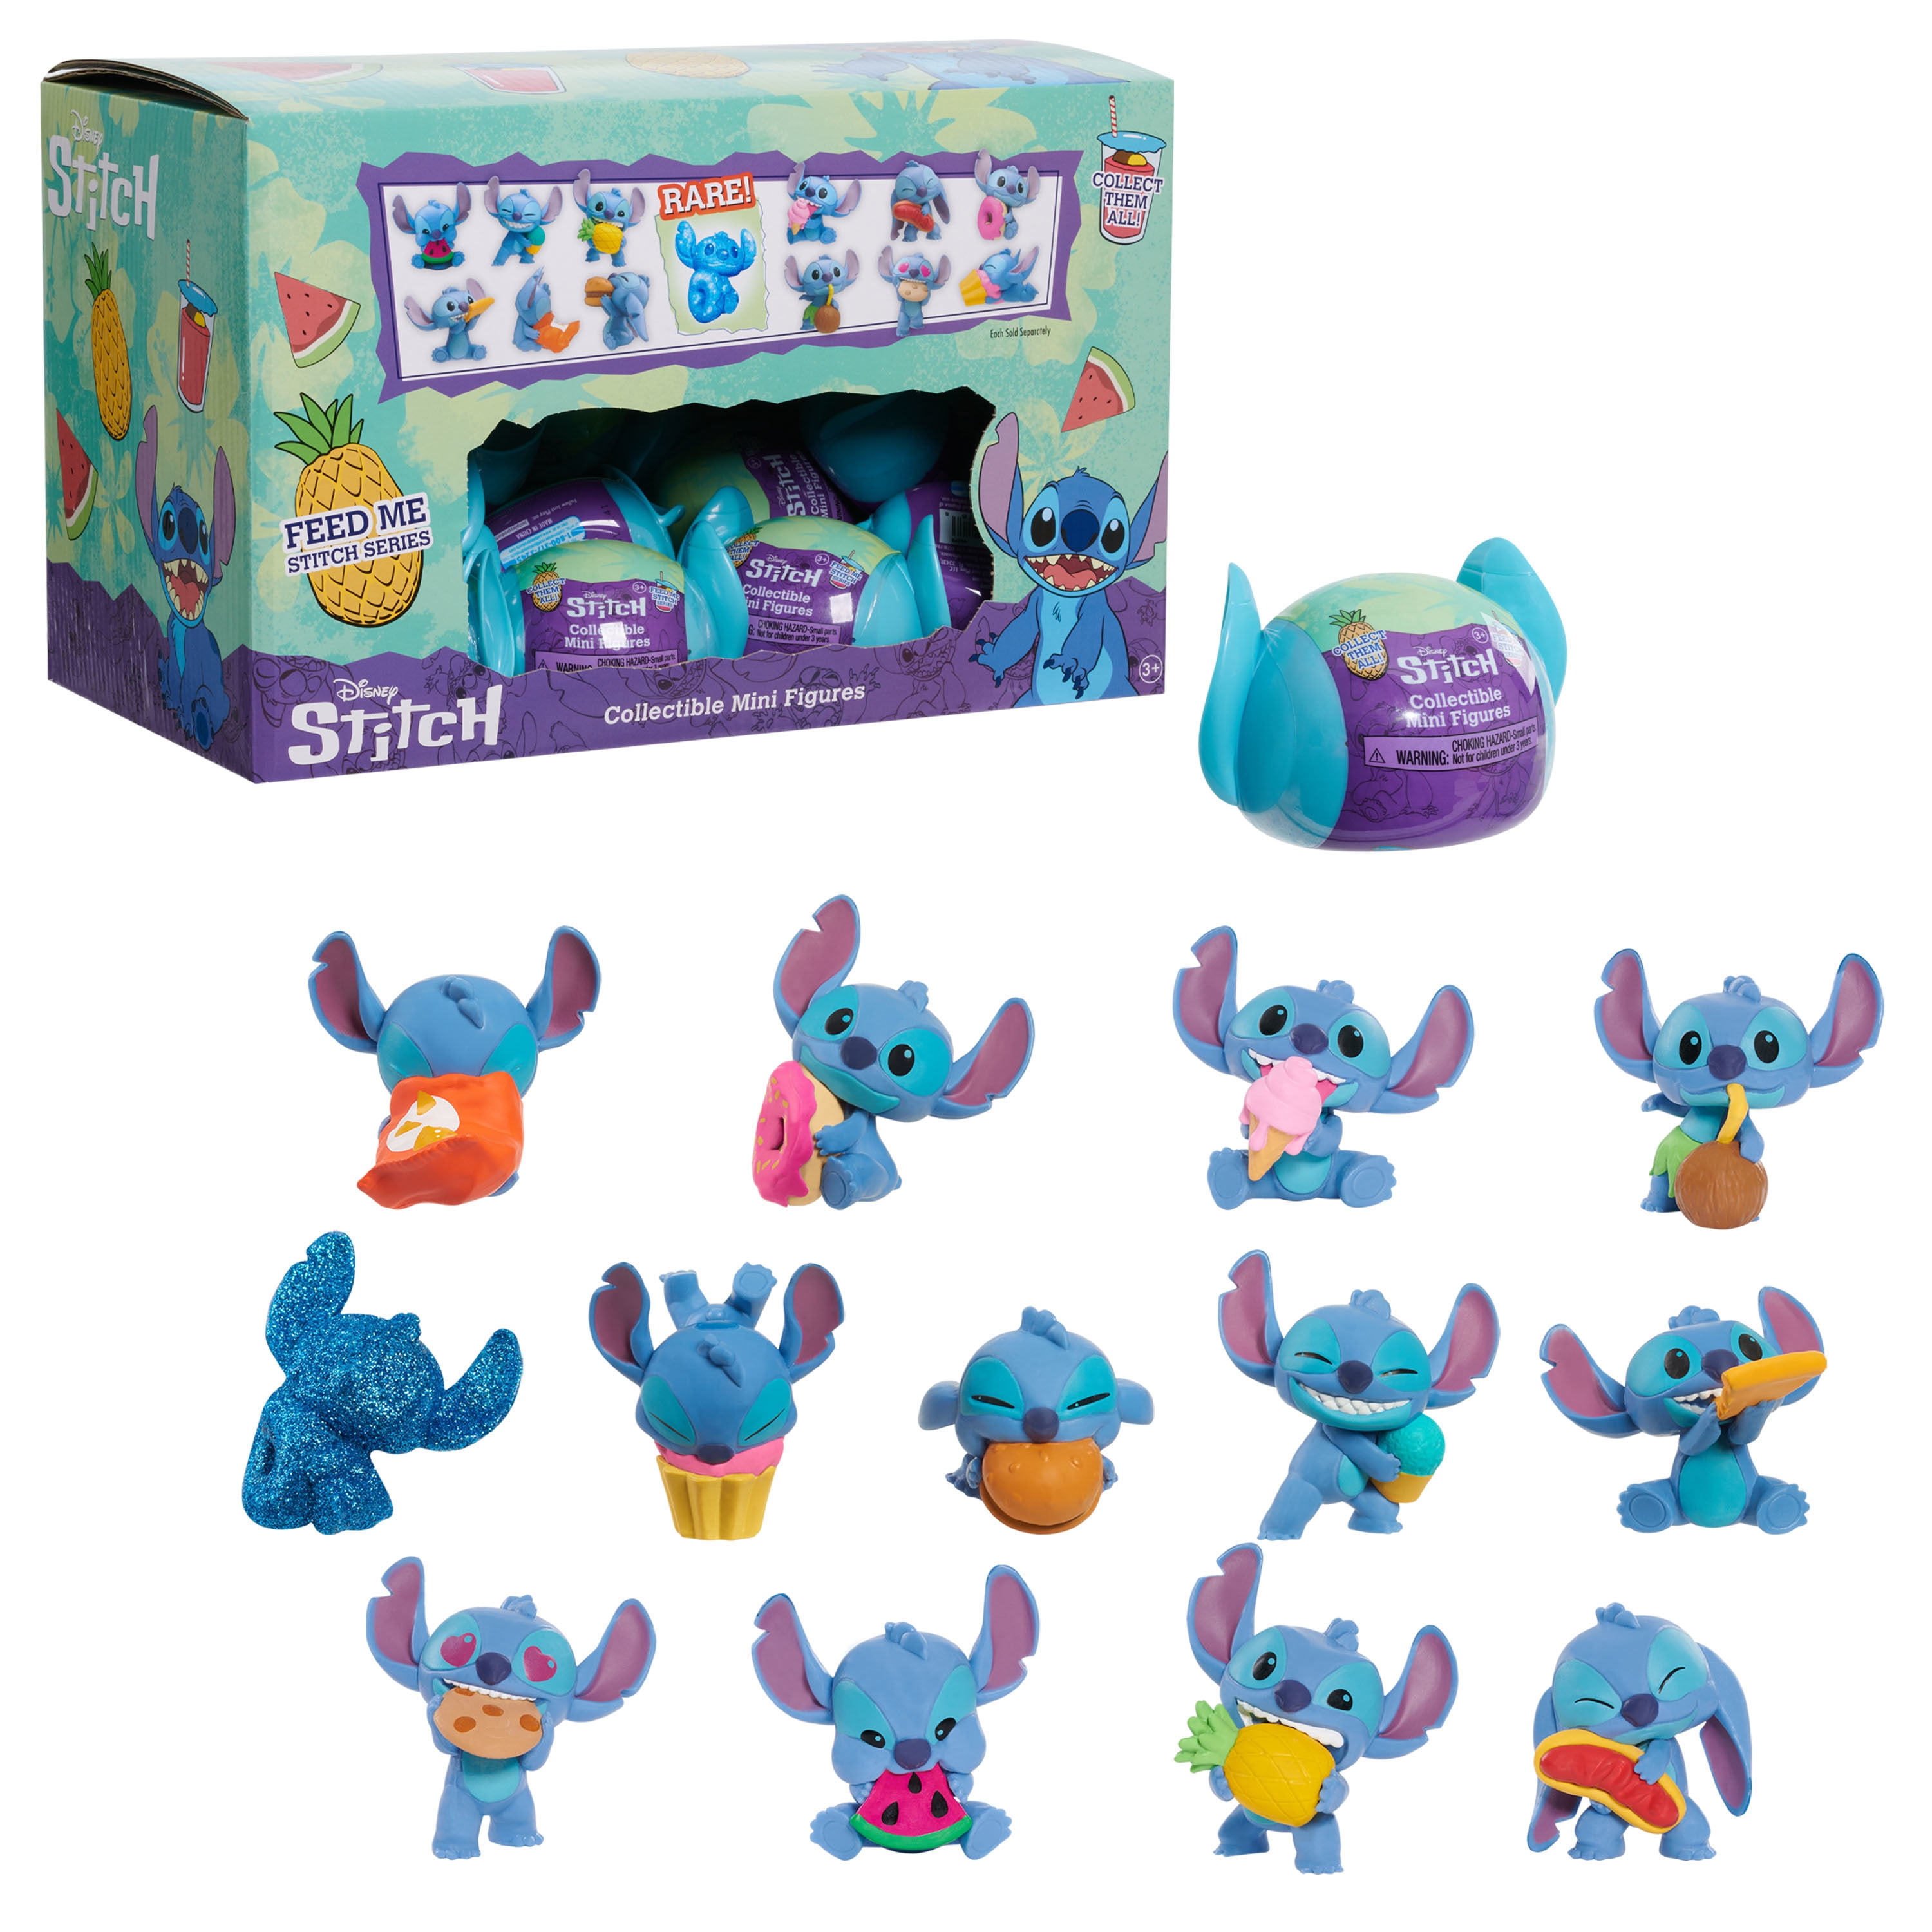 Disney Stitch Feed Me Series Capsule Collectible Mini Figures, Officially Licensed Kids Toys for Ages 3 Up, Gifts and Presents